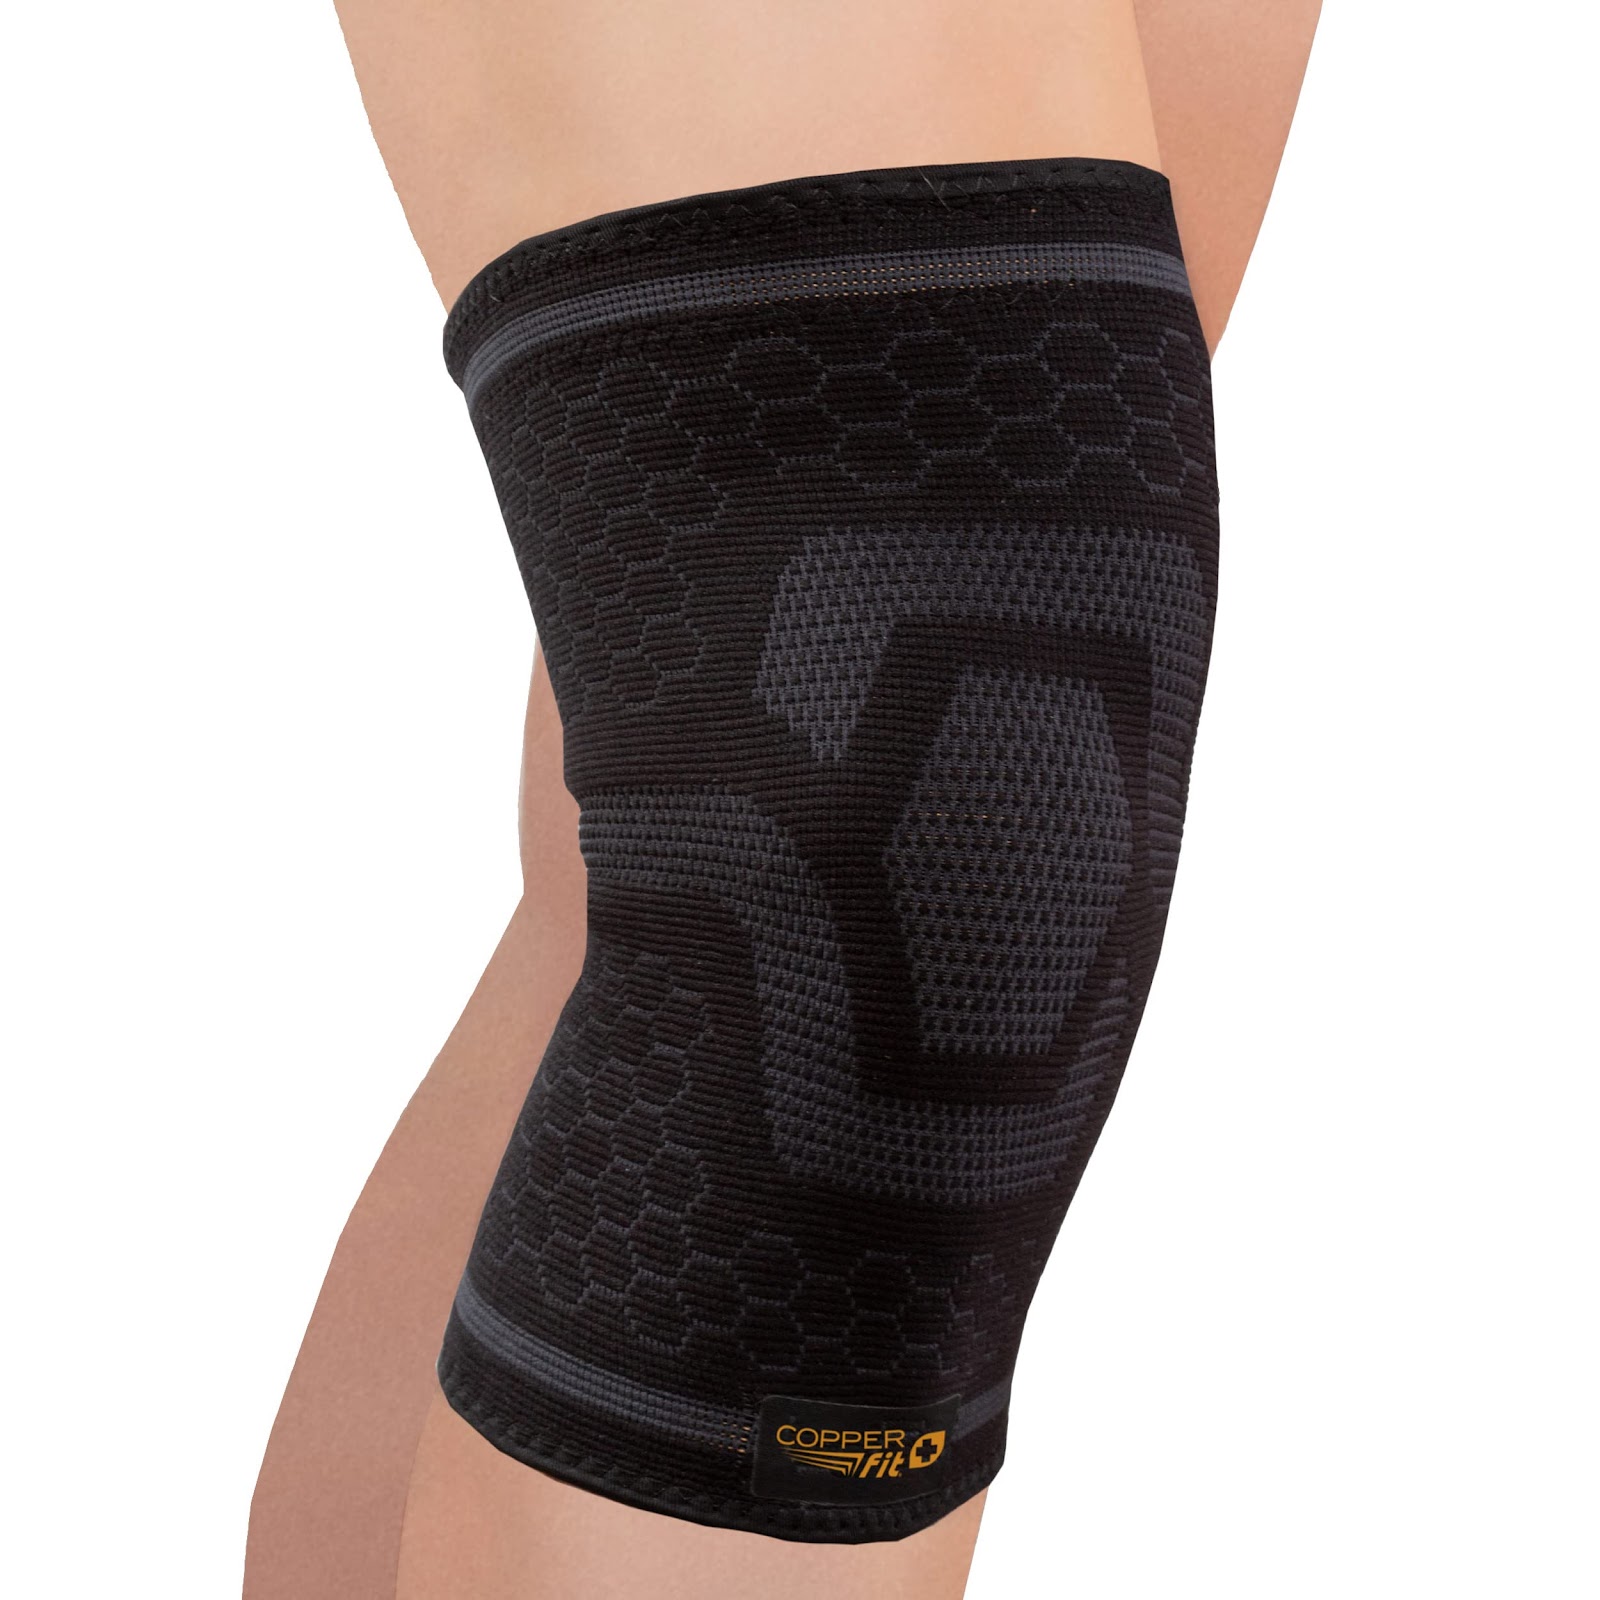 Copper Fit ICE Knee Compression Sleeve